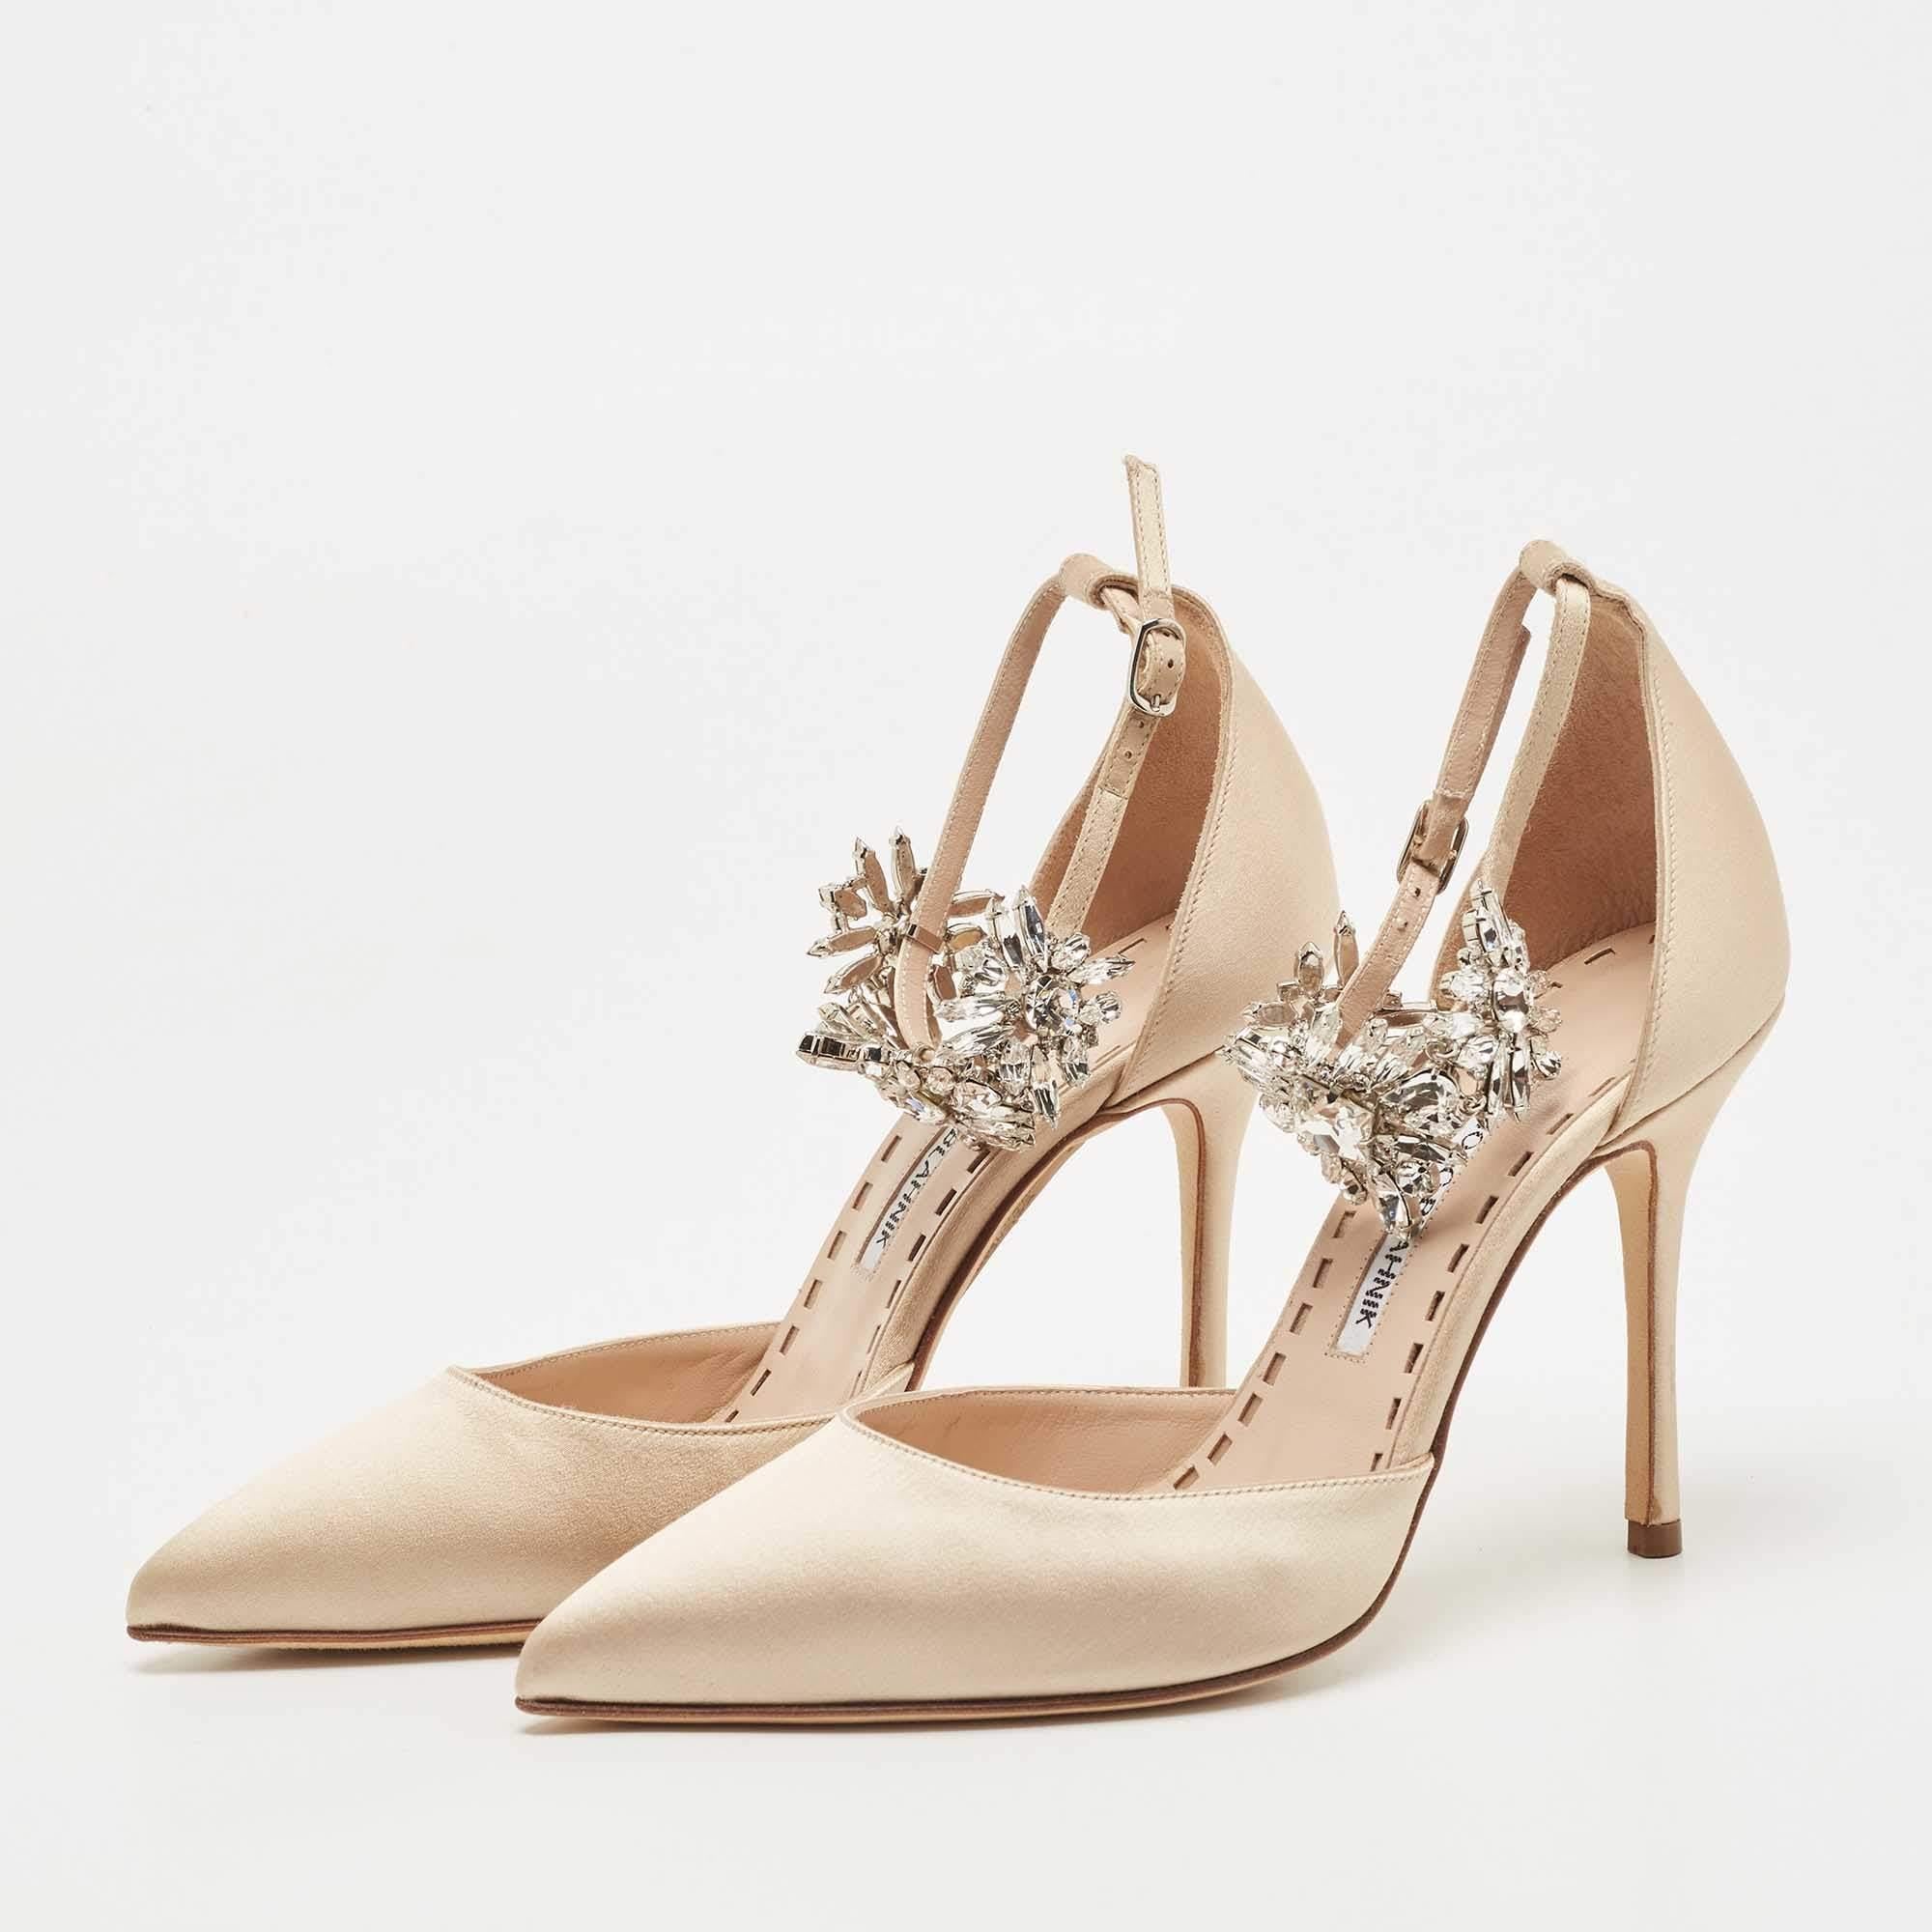 The Manolo Blahnik Sicariata pumps are a luxurious and elegant footwear choice. Featuring a pointed toe and stiletto heel, these pumps are crafted with crystal-embellished ankle straps. The Sicariata pumps effortlessly blend timeless sophistication